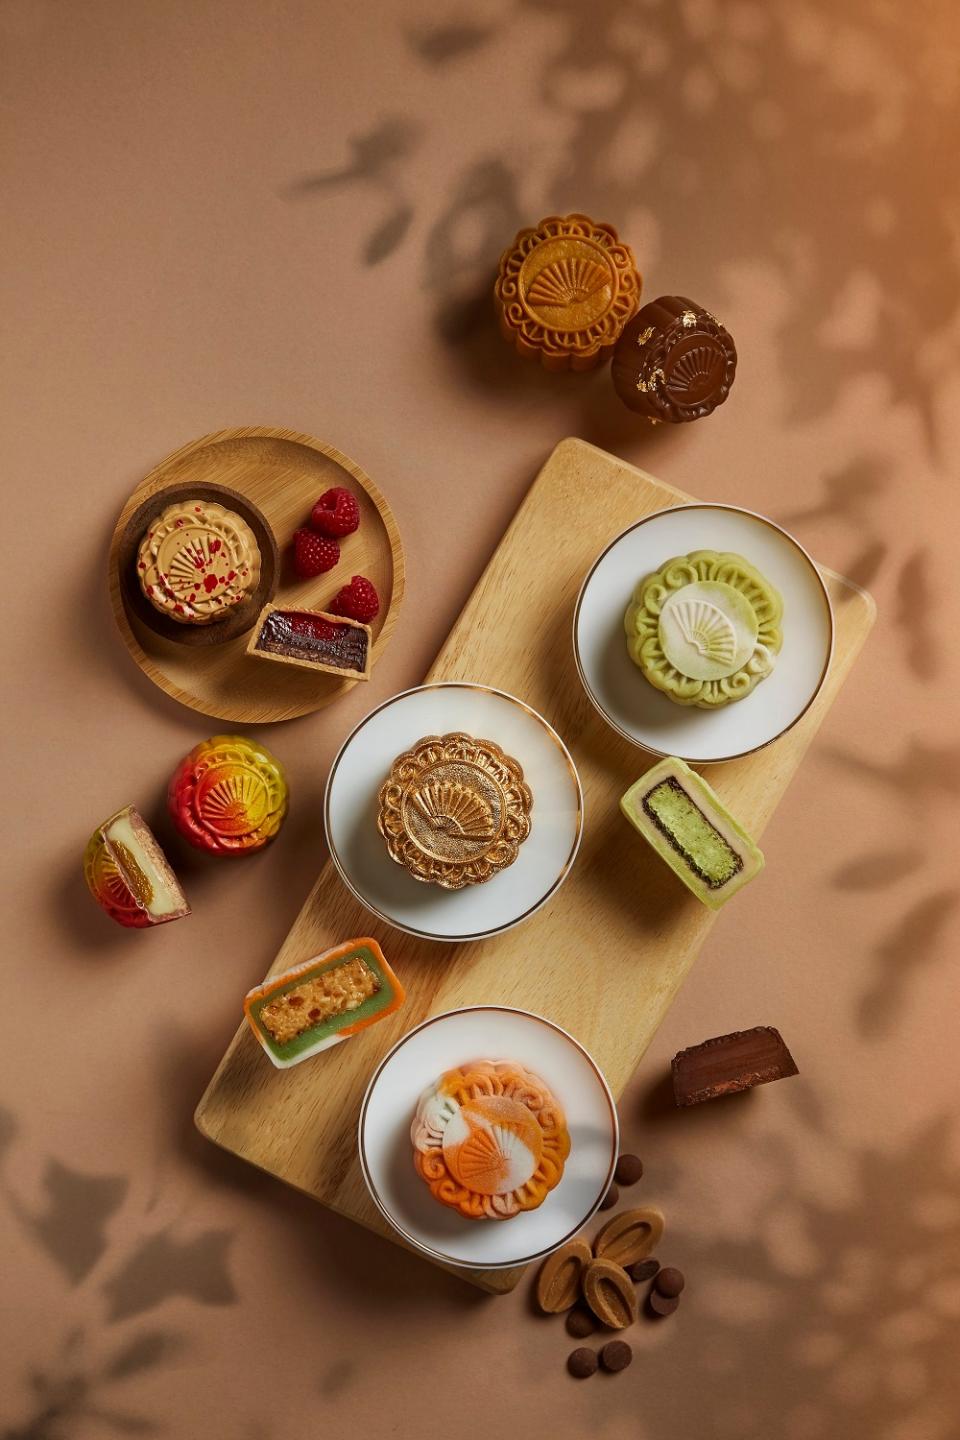 From Mandarin Oriental, its mooncakes come from the hotel’s award-winning Lai Po Heen. — Picture courtesy of Mandarin Oriental